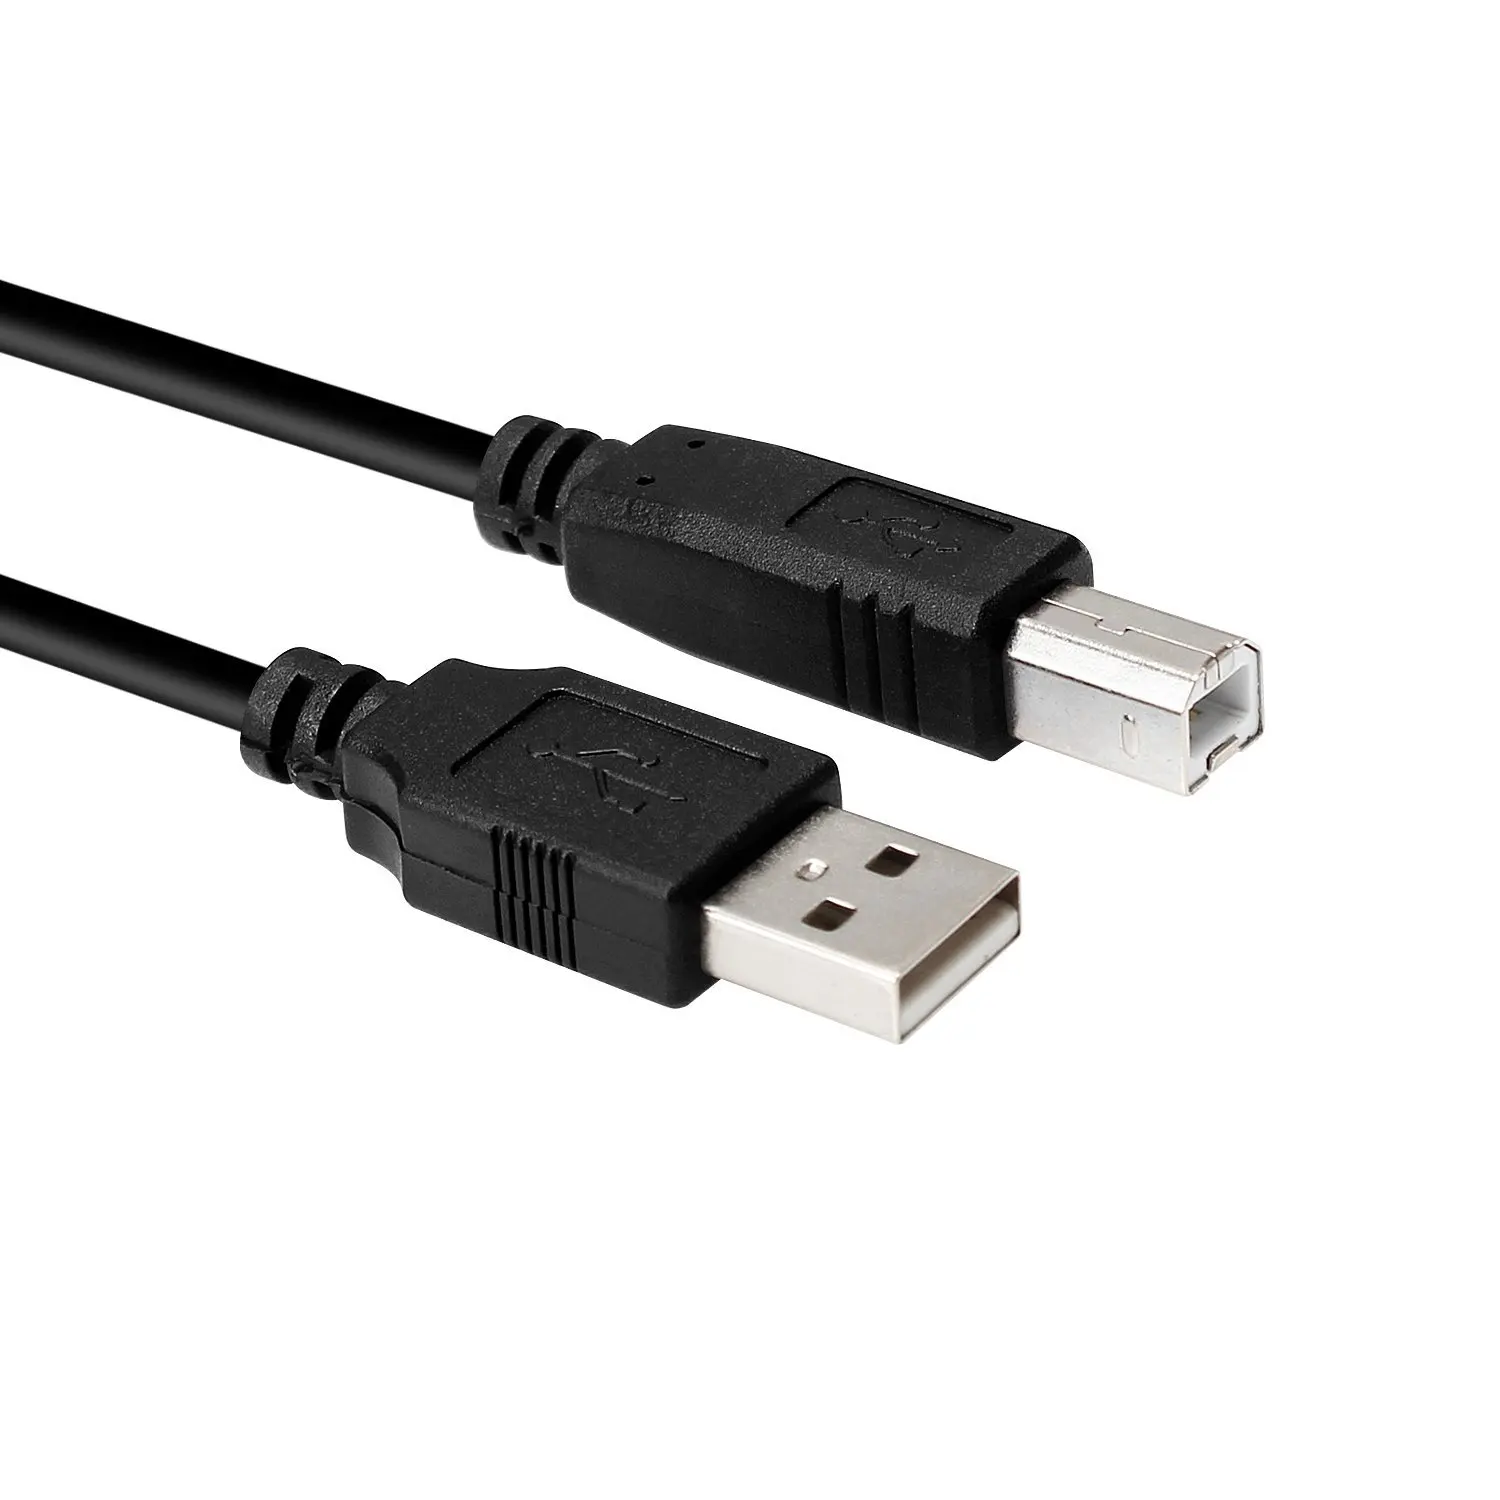 Charger Cable USB 3.0 3.1 USB A Male to Type C Cable Fast Charger wire for mobile phone notebook 31